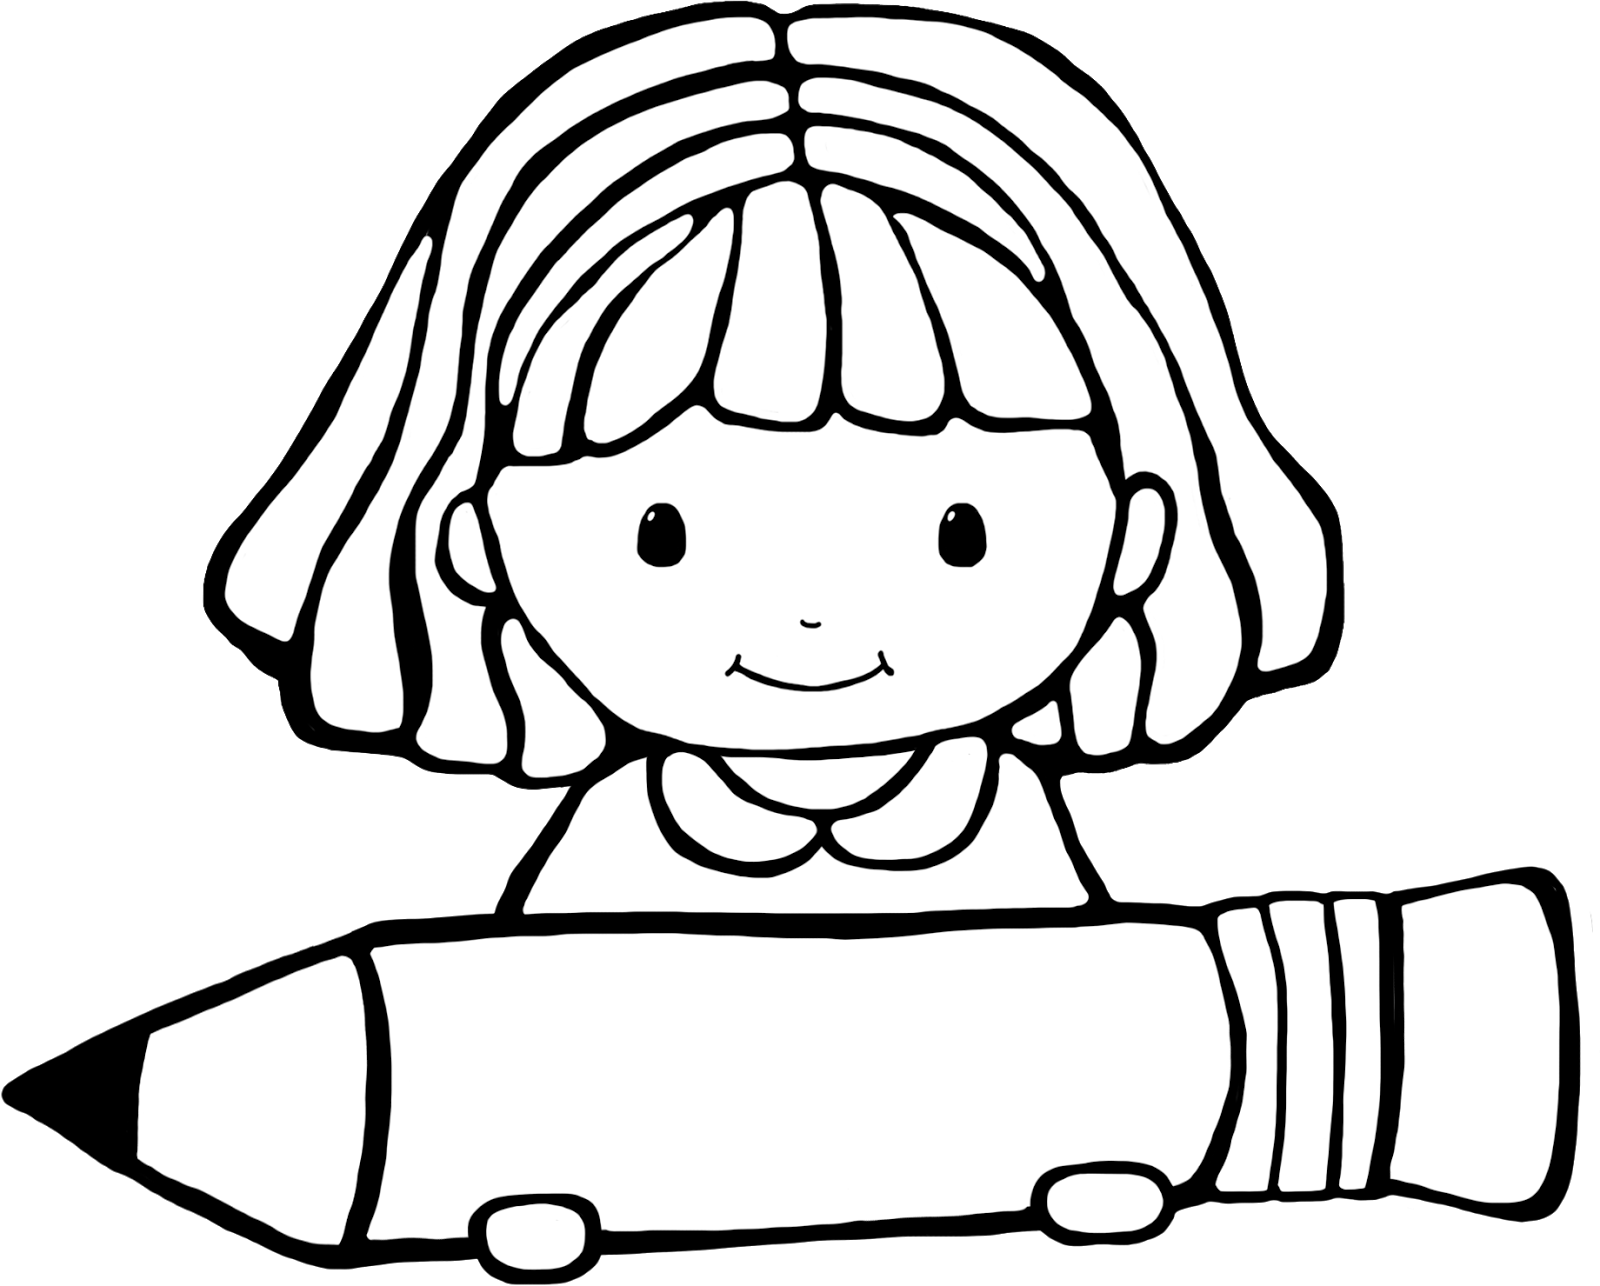 Girl clipart black and white, Girl black and white Transparent FREE for